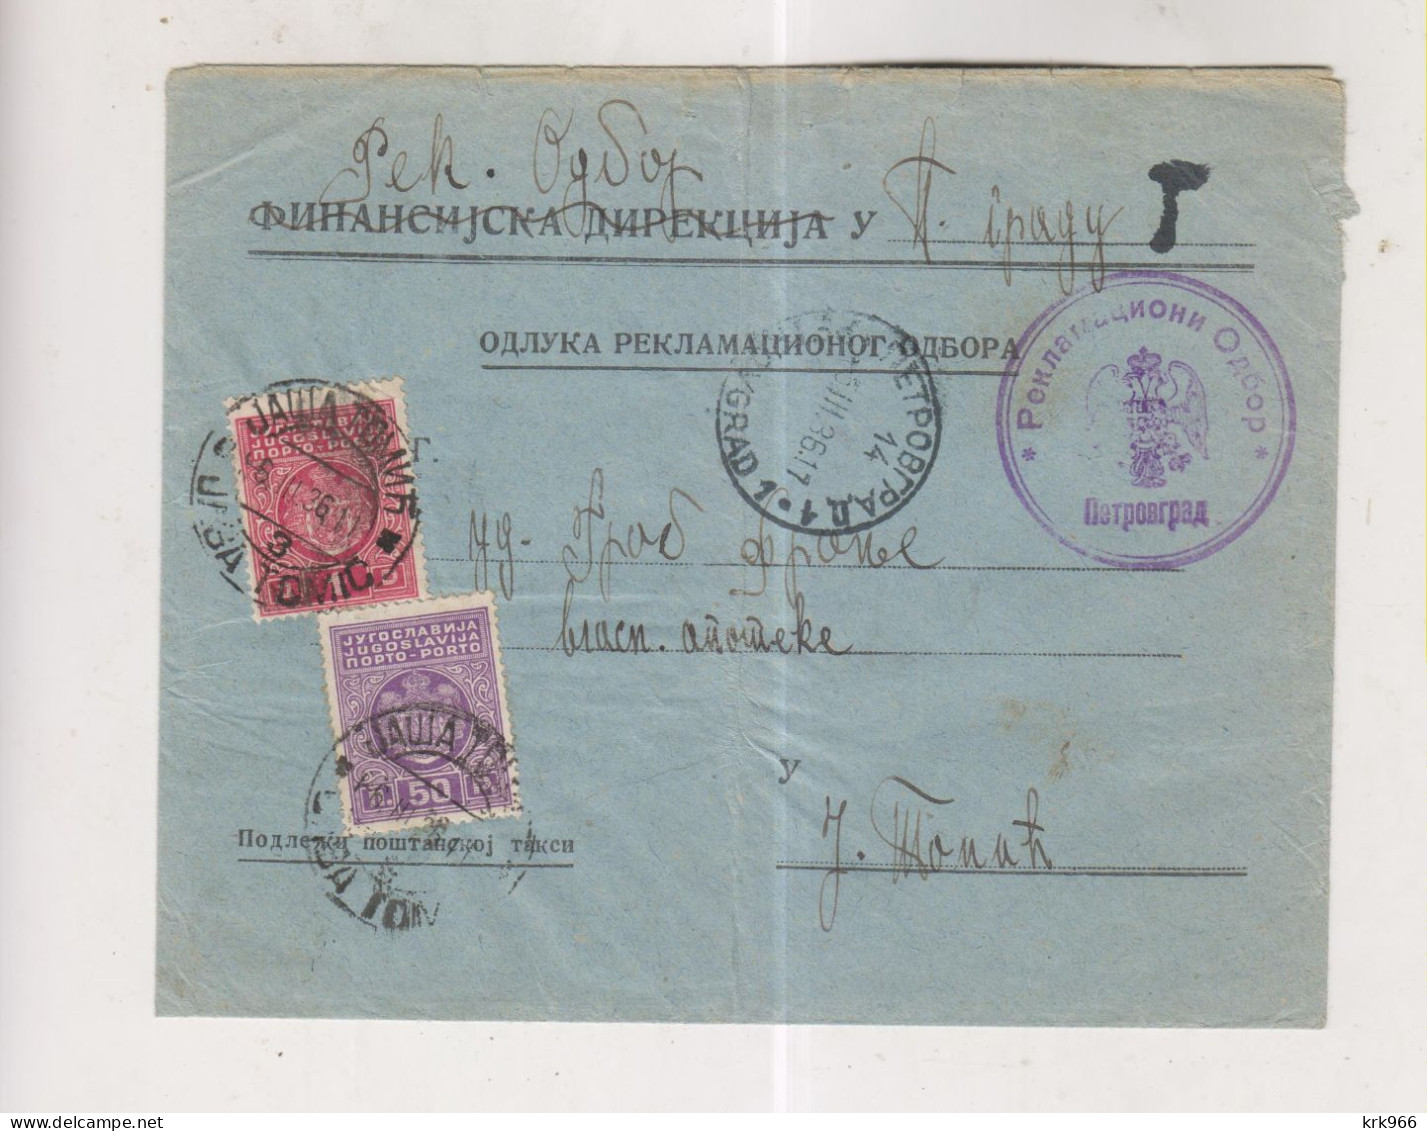 YUGOSLAVIA PETROVGRAD 1936 Nice Official Cover To JASA TOMIC Postage Due - Covers & Documents